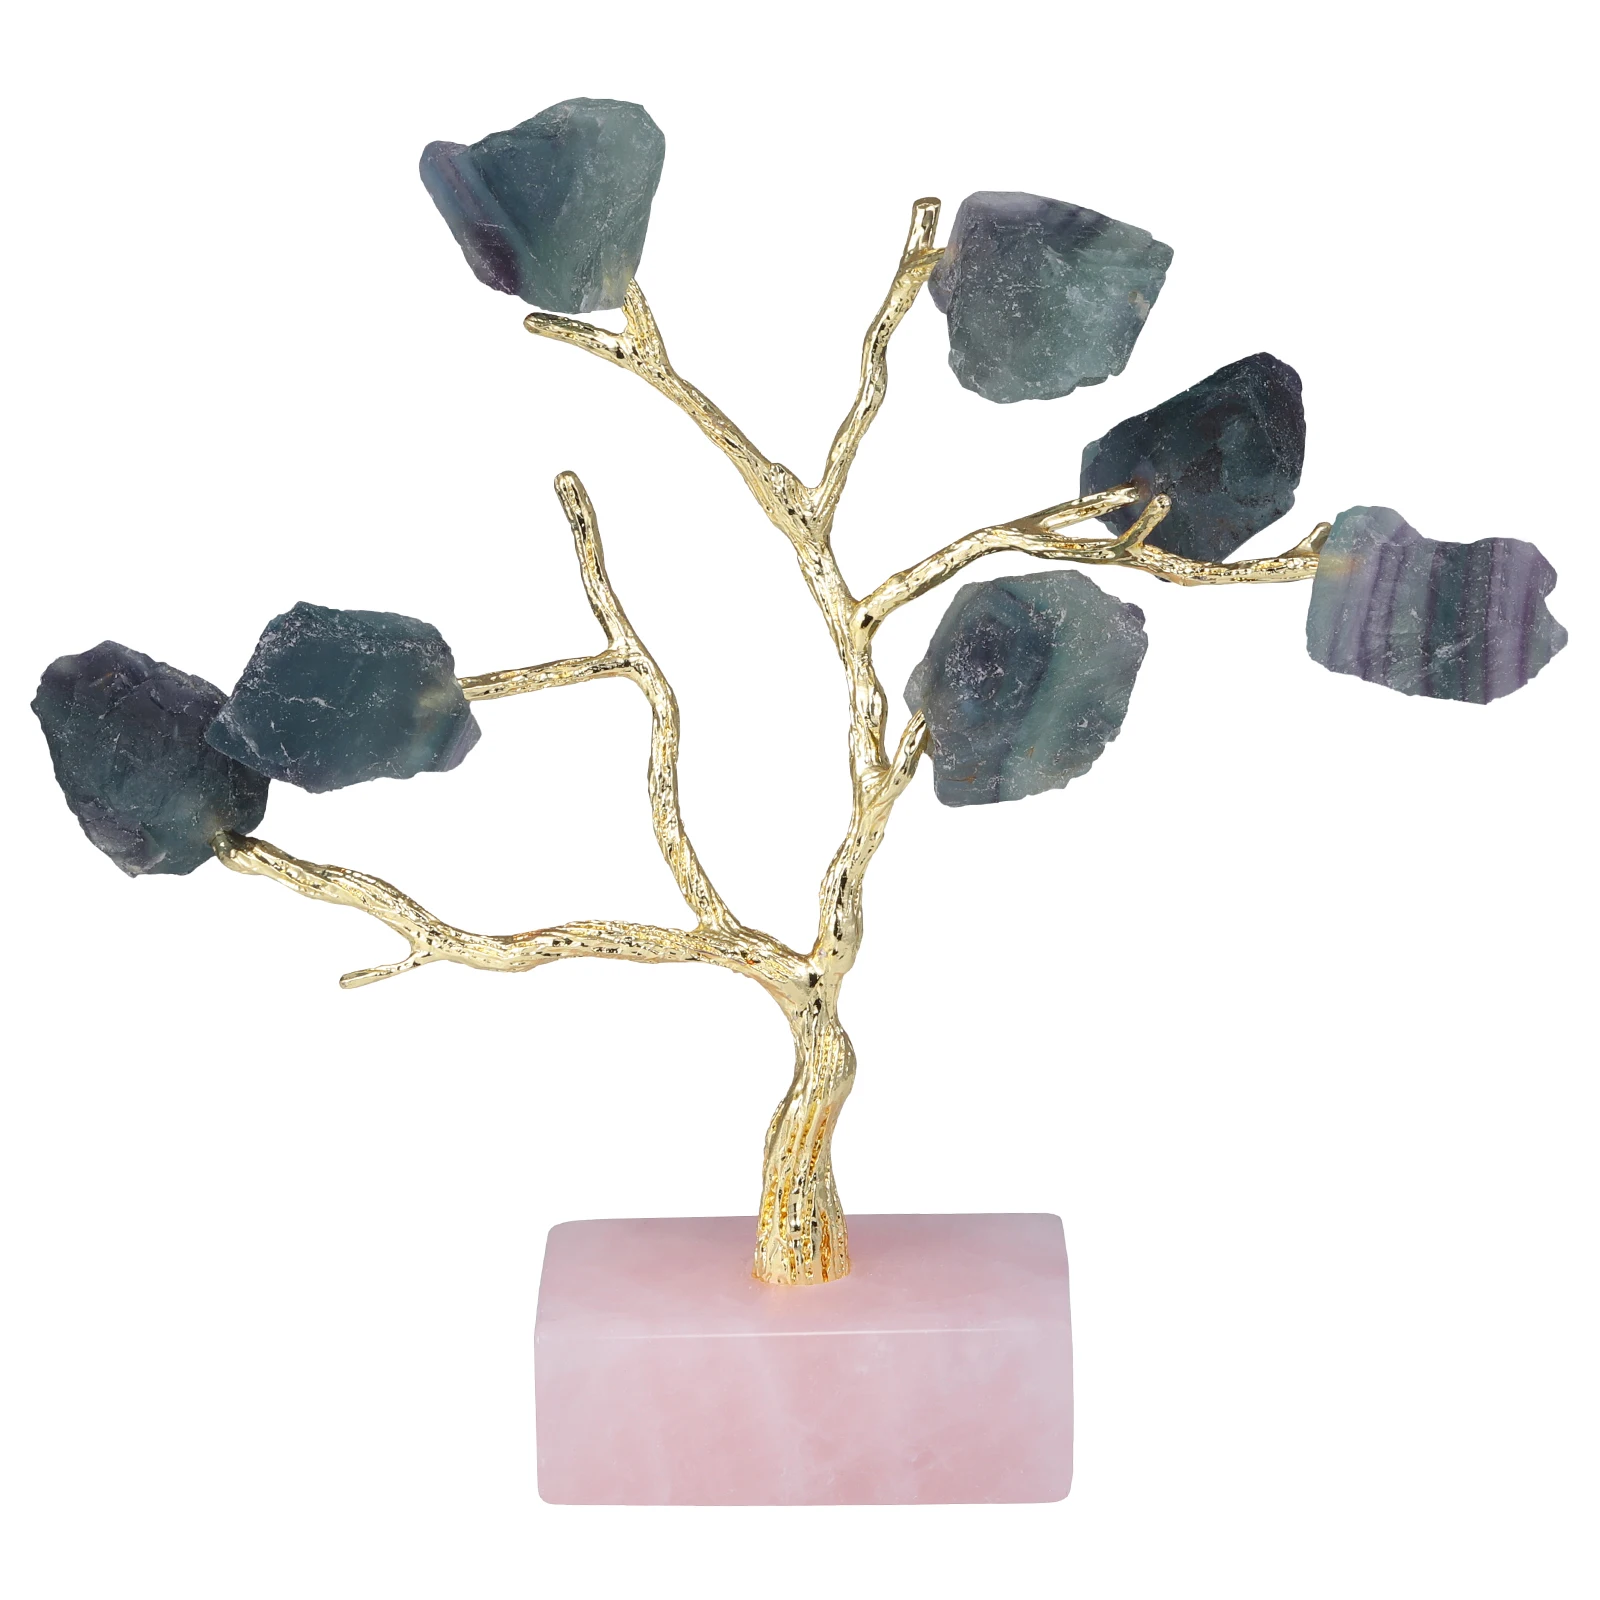 Natural Rough Crystal Stone Tree With Rose Quartz Base Healing Gemstone Golden Tree For Jewelry Organizer Home Table Decoration reiki irregular rough stone crafts fluorite lapis lazuli with stainless steel stand for table decoration nordic home ornaments